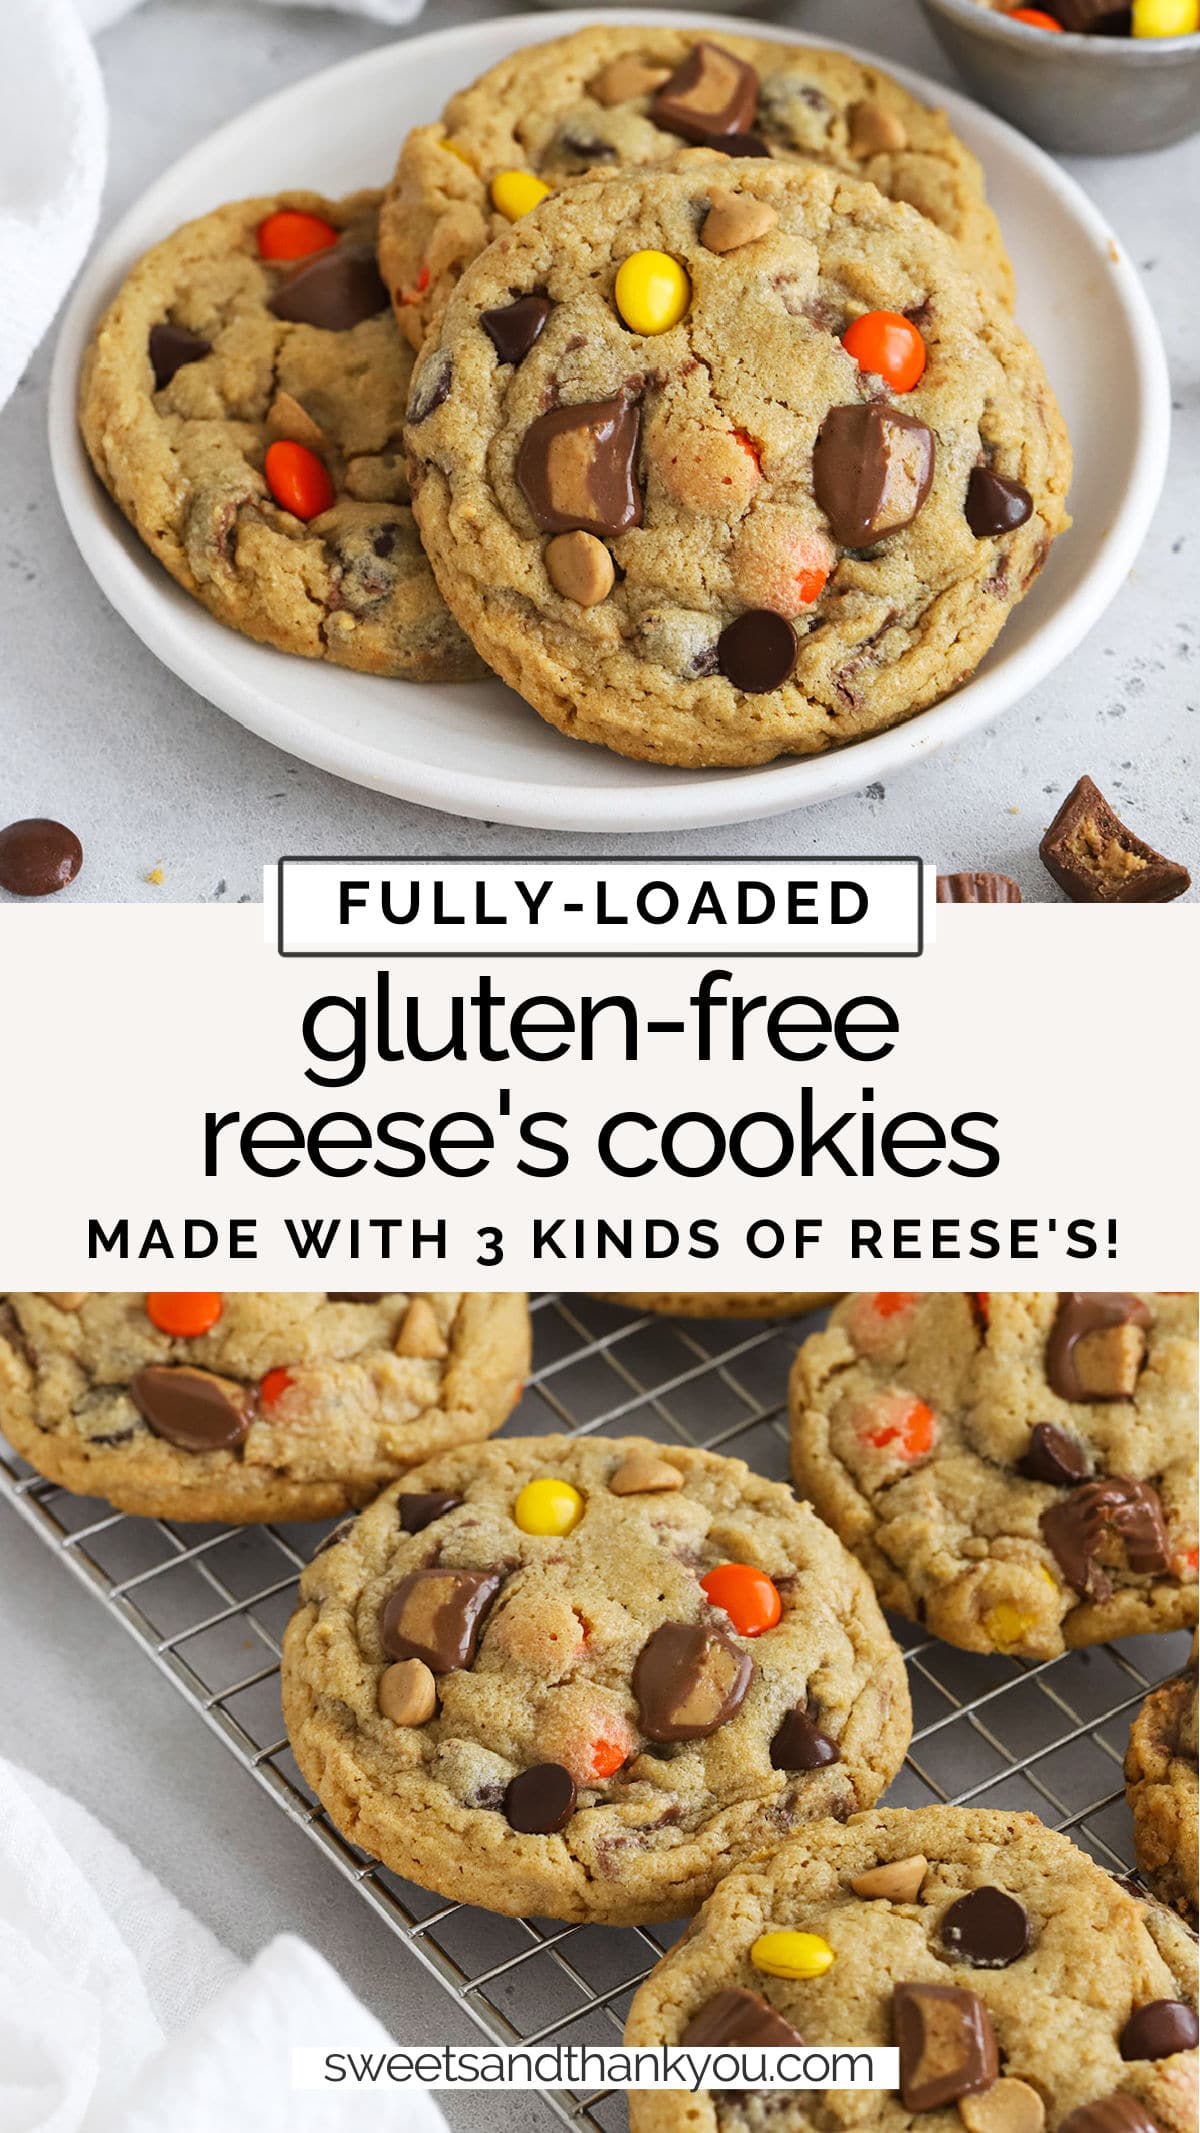 Gluten-Free Reese's Cookies - These gluten-free peanut butter cookies are fully loaded with Reese's cups, Reese's pieces, peanut butter chips AND chocolate chips! The ultimate cookie for peanut butter lovers! / gluten free Reese's peanut butter cookies / gluten-free Reeses peanut butter chocolate chip cookies // gluten-free chocolate peanut butter cookies // gluten-free Reese's pieces cookies /